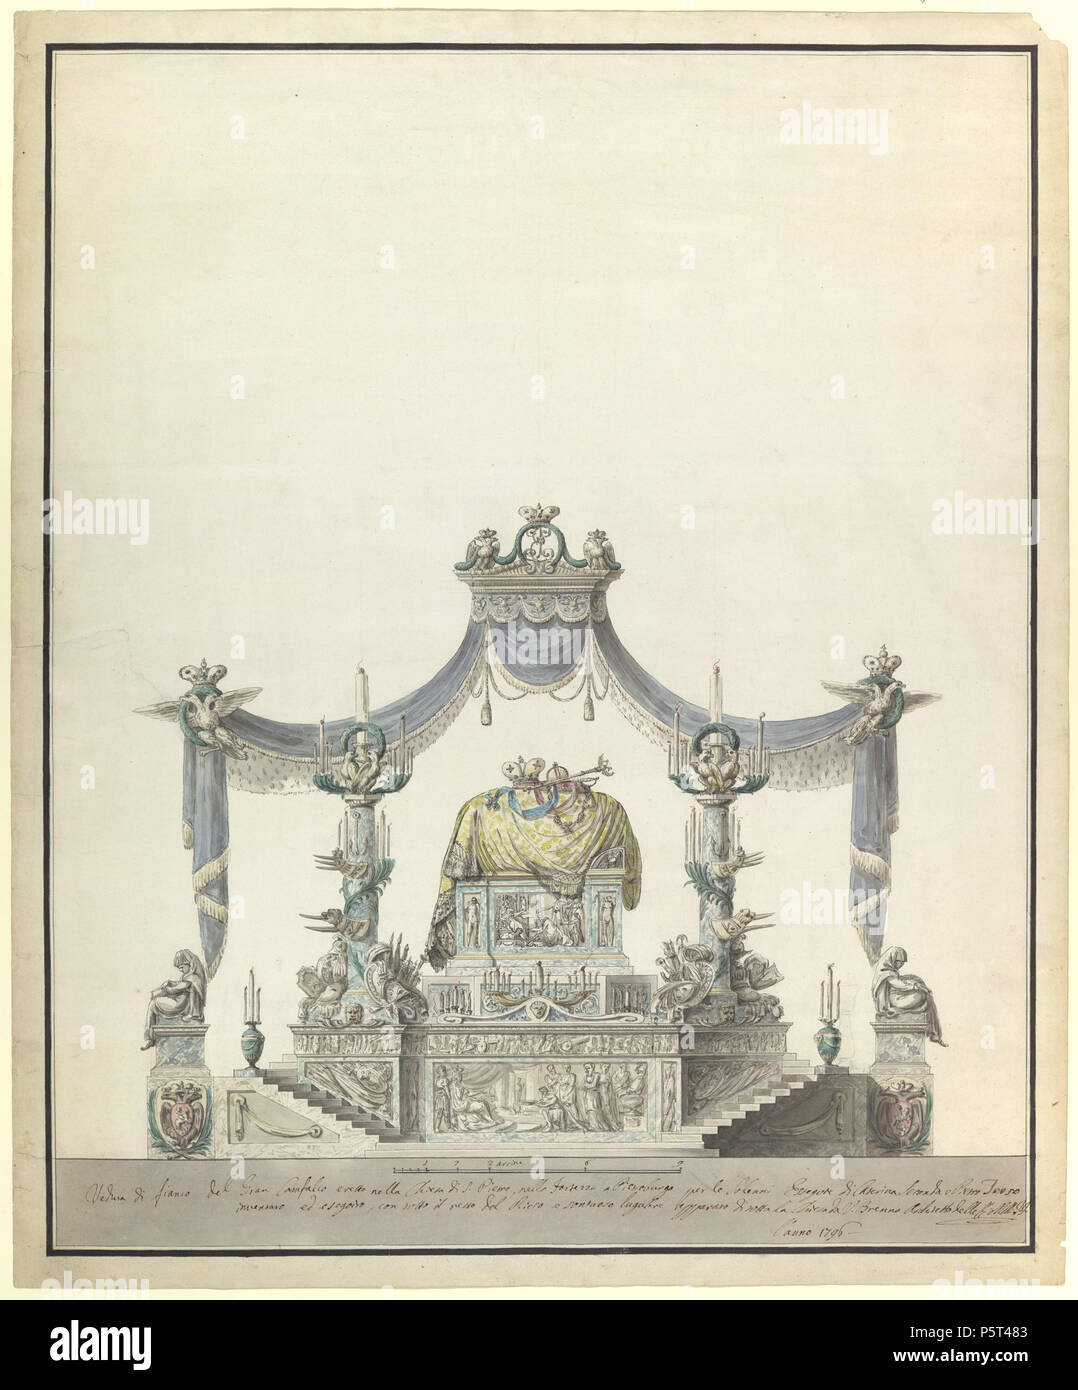 N/A.  Catafalque of the Empress Catherine the Great of Russia (Side Elevation). Vincenzo Brenna (Italian, Florence 1745–1820 St. Petersburg) Date: 1796 Medium: Pen and gray-black ink, brush and watecolor, over traces of graphite or leadpoint Dimensions: sheet: 28 1/4 x 23 3/8 in. (71.7 x 59.4 cm) Classifications: Drawings, Ornament & Architecture Credit Line: Gift of Mrs. Charles Wrightsman, 1993 Accession Number: 1993.1071.1 View of the side elevation of the catafalque designed by Brenna for the burial of Catherine the Great of Russia and her husband Tsar Peter III (died 1762) held in the Cat Stock Photo